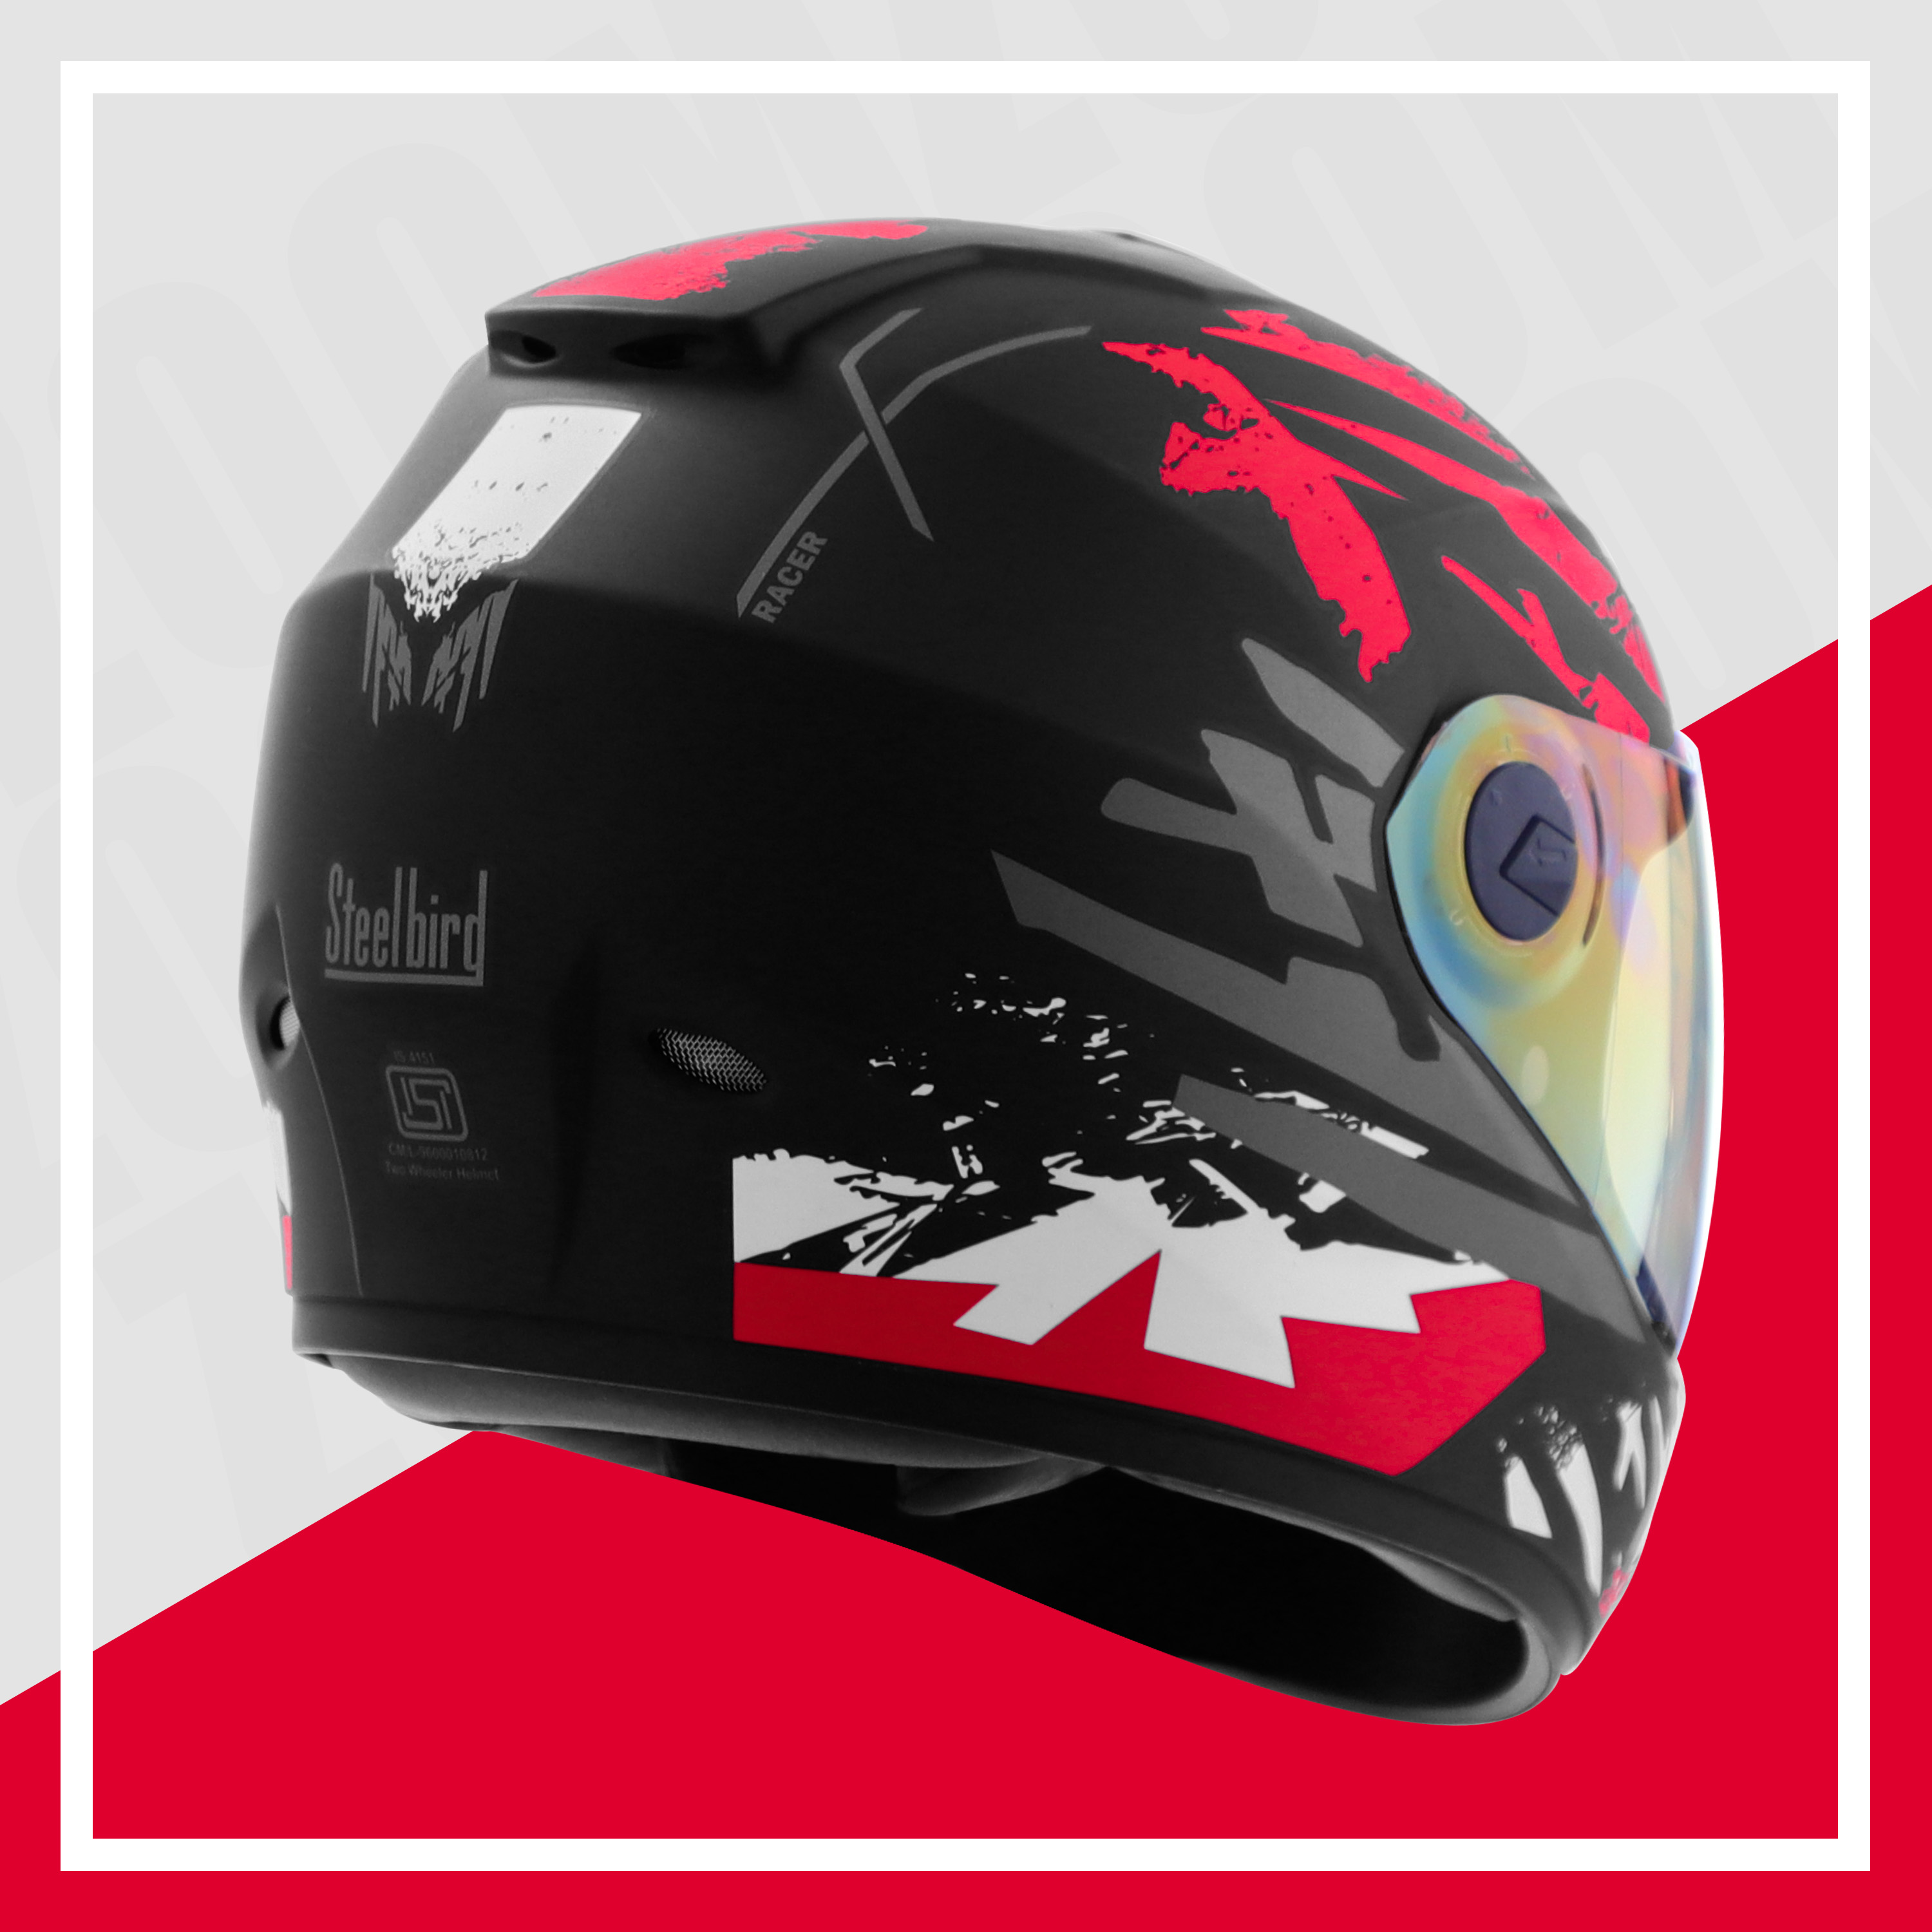 Steelbird SBH-11 Zoom Racer ISI Certified Full Face Graphic Helmet For Men And Women (Glossy Black Red With Chrome Rainbow Visor)